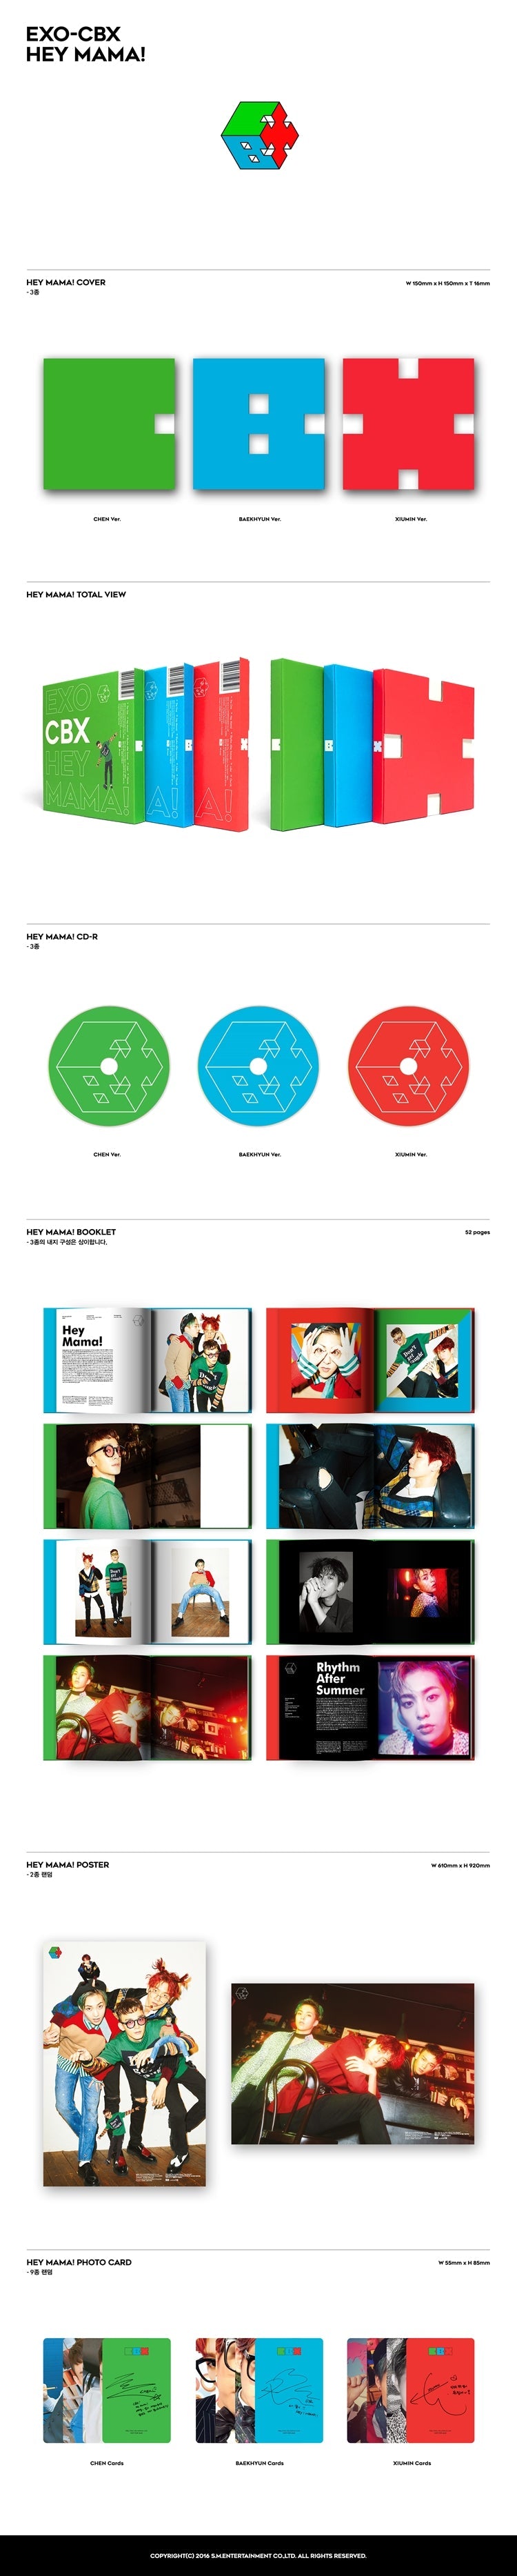 1 CD
1 Booklet (52 pages)
1 Photo Card (random out of 9 types)